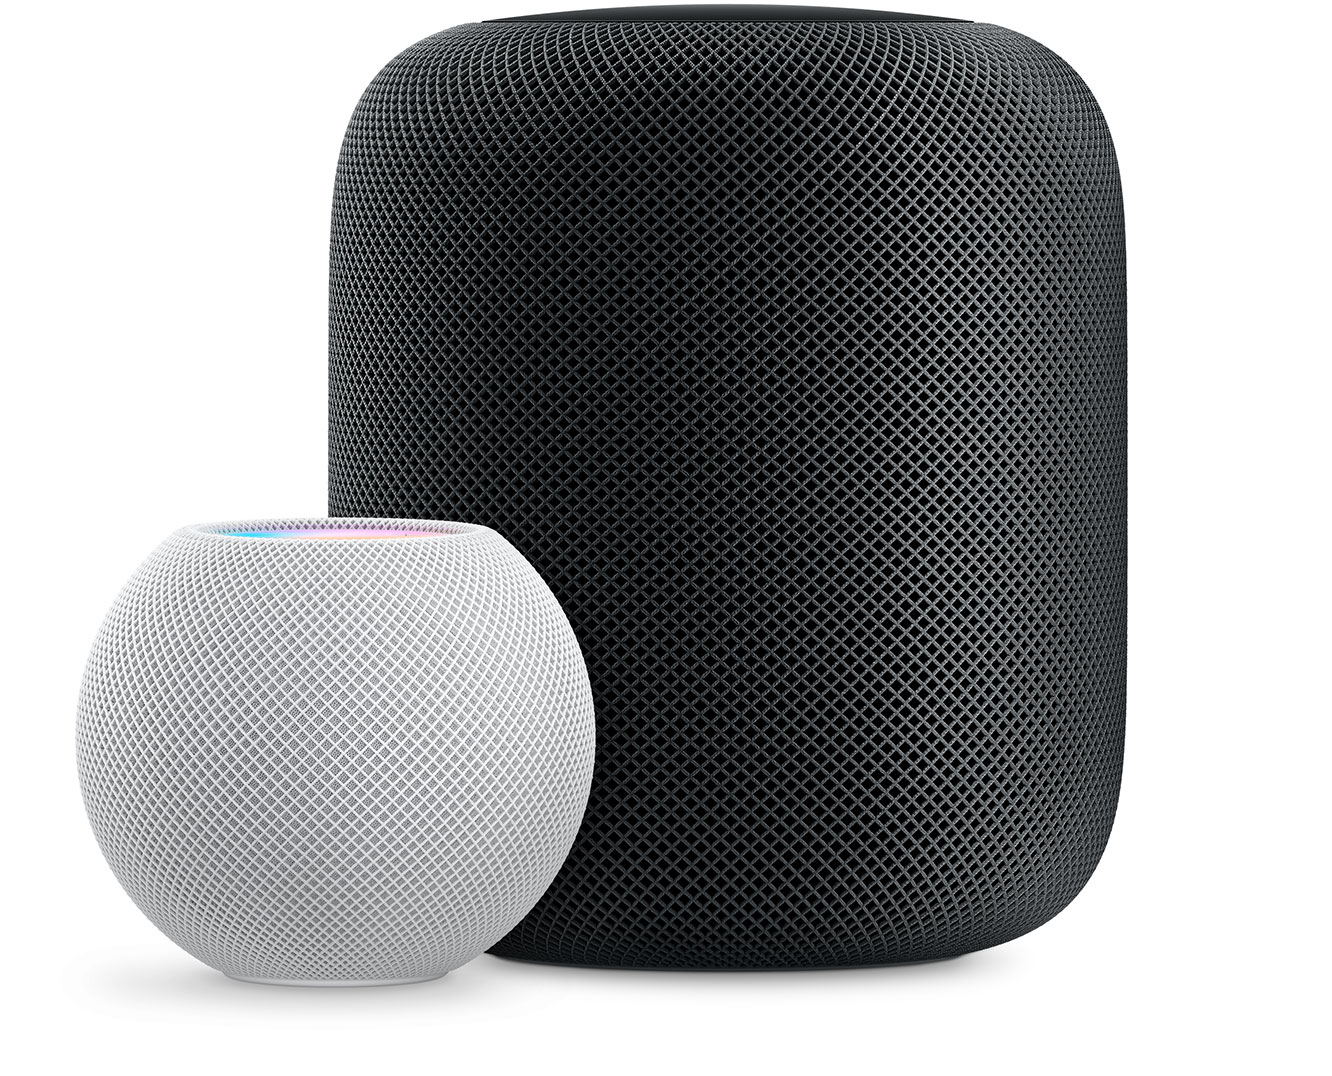 White HomePod mini in front and to the left of a Space Grey HomePod.